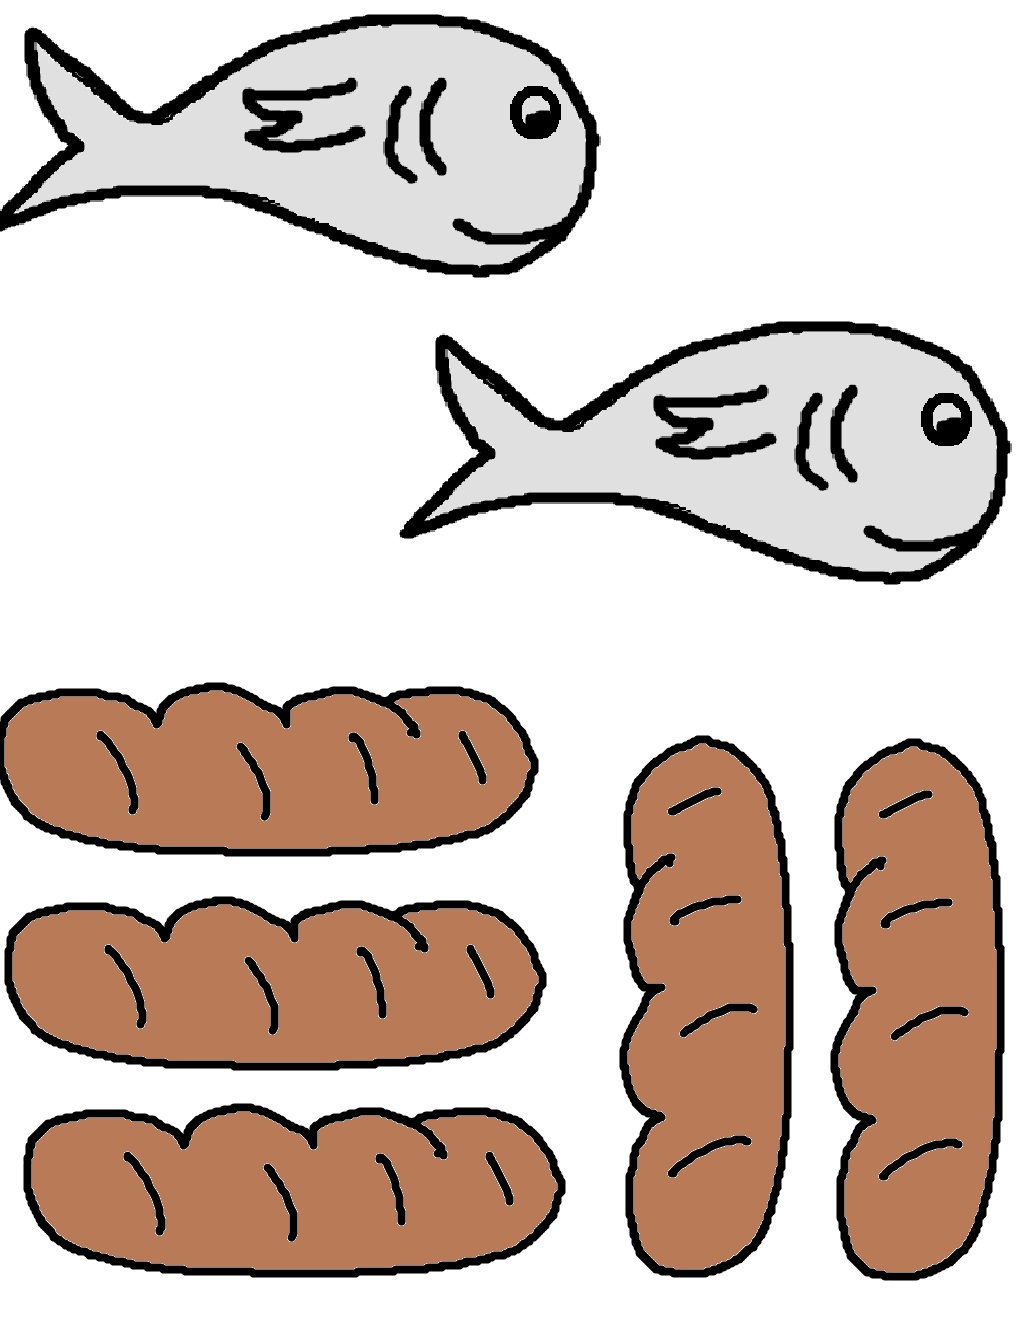 10 Loaves And Fishes Colouring Free Cliparts That You Can Download To    